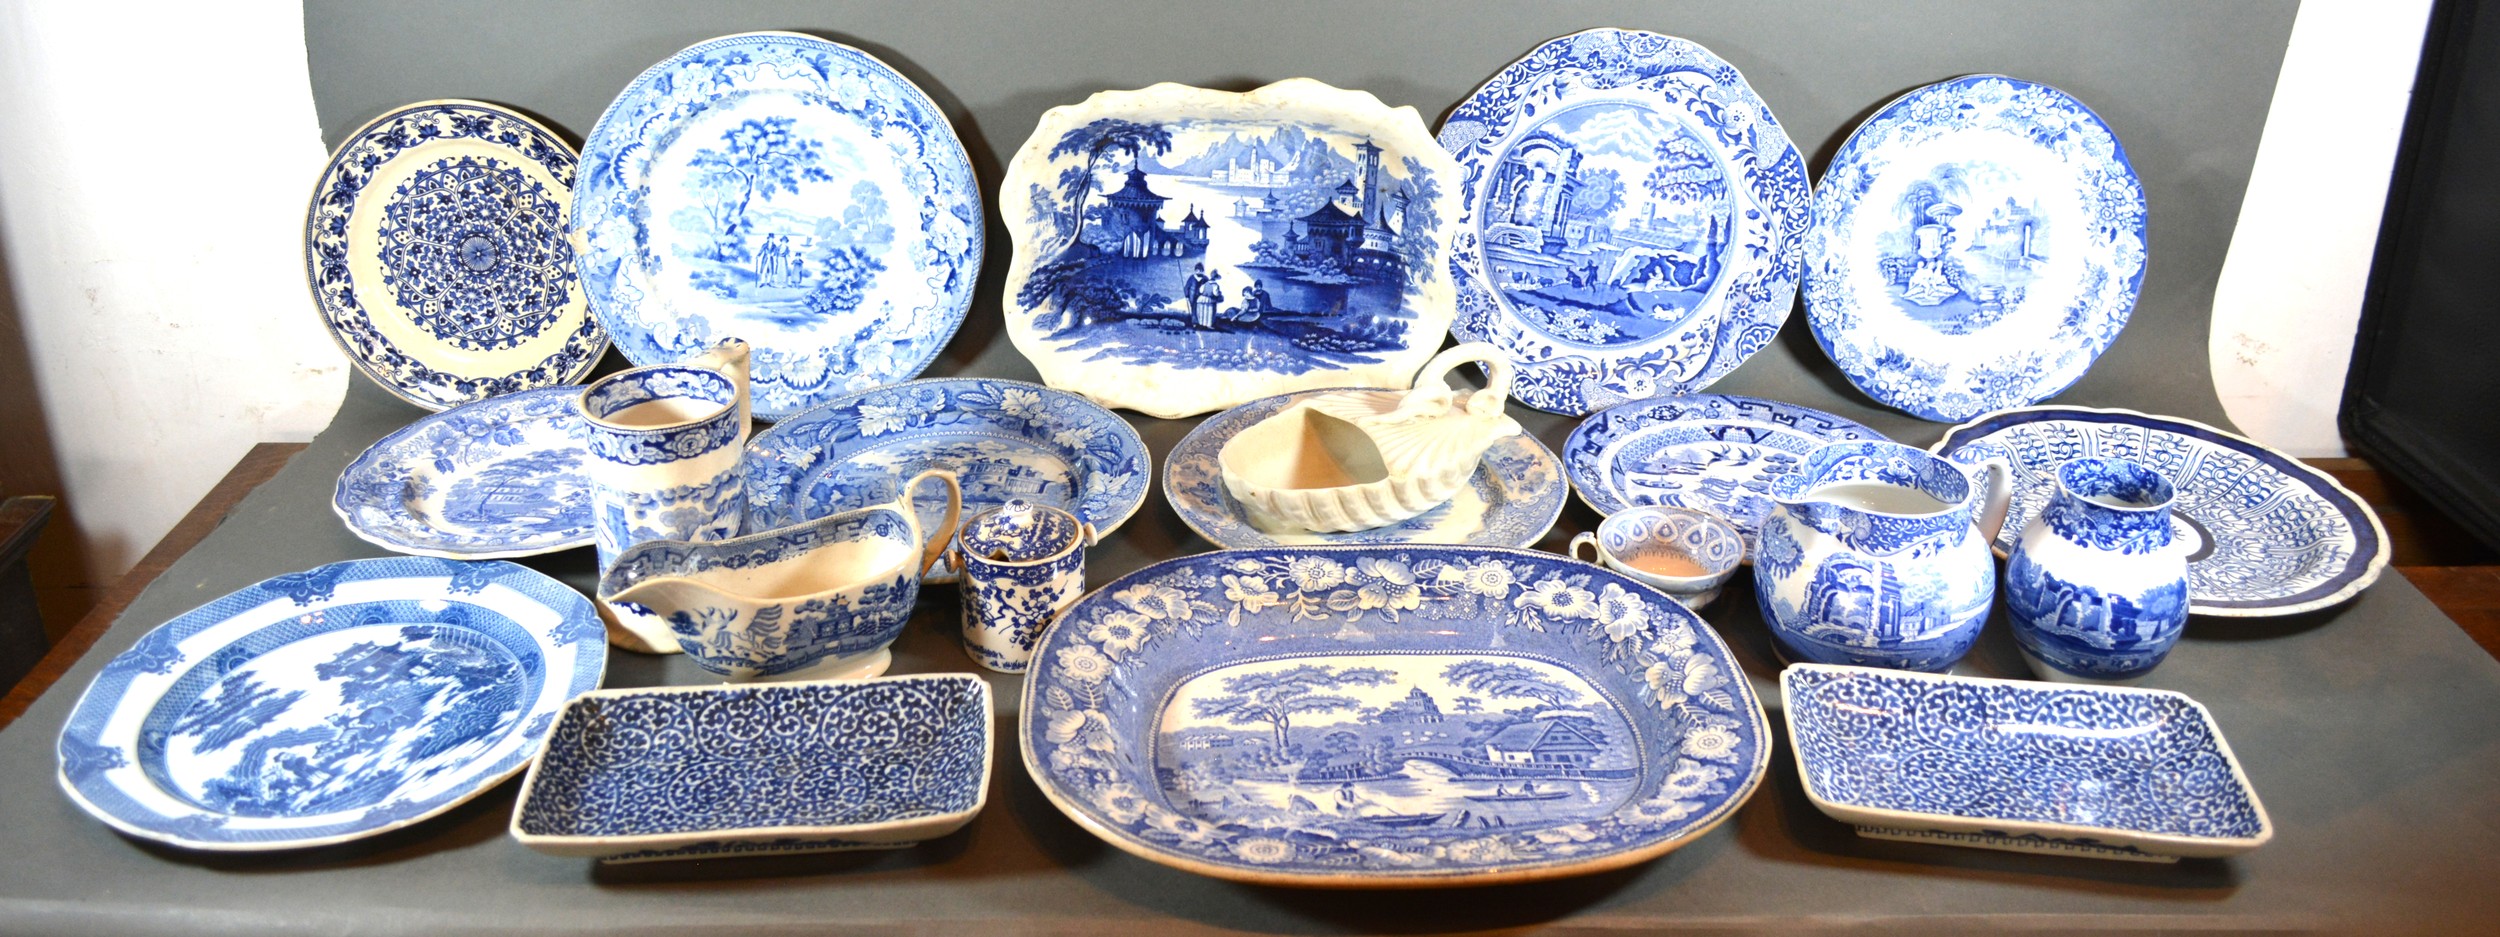 An Early English Blue and White Decorated Meat Platter together with a collection of other similar